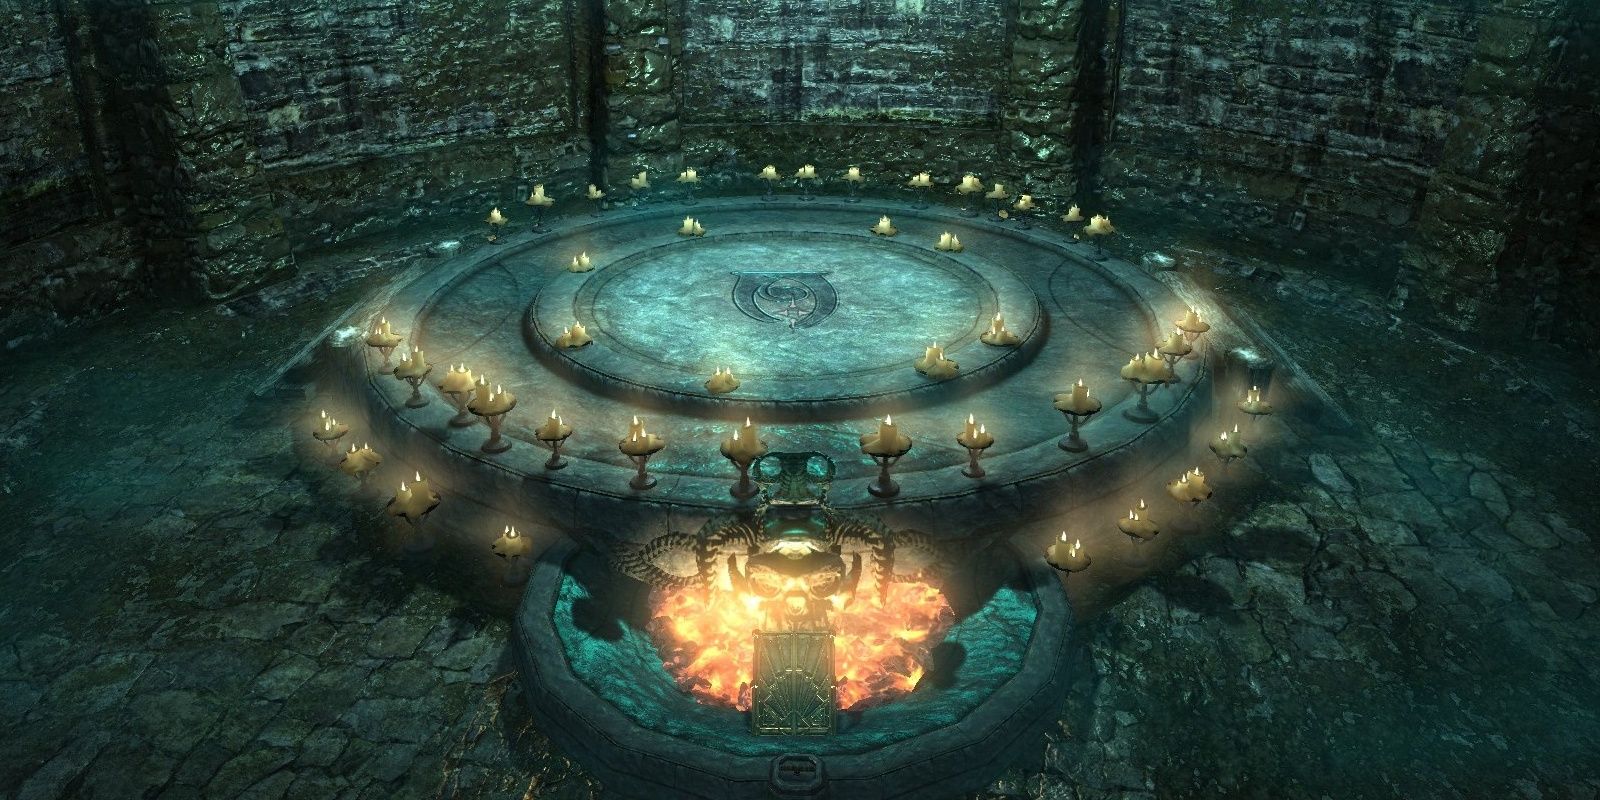 Skyrim's Antronach Forge In The Midden